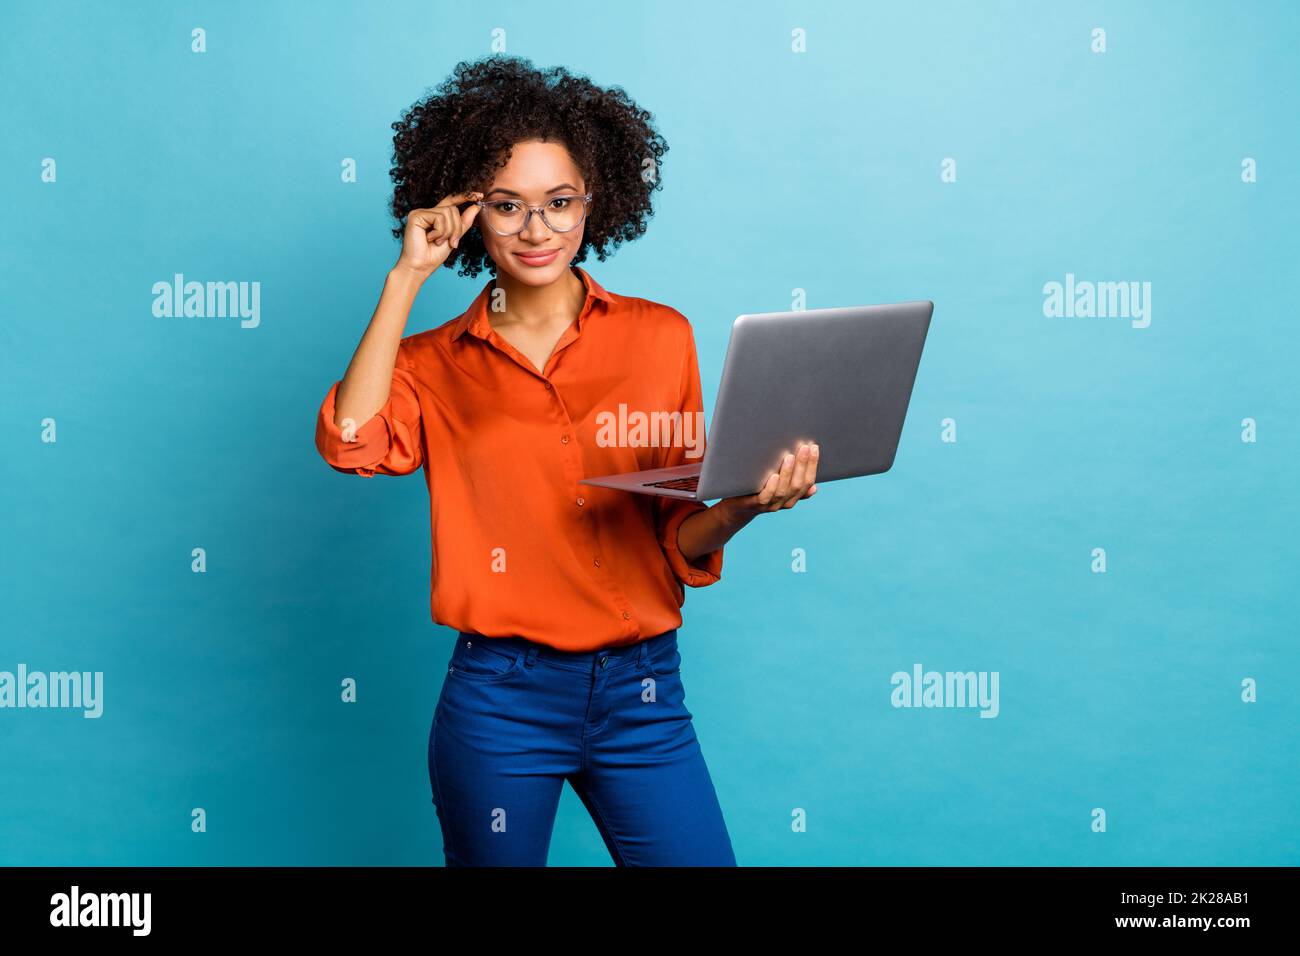 Portrait of beautiful trendy intellectual wavy-haired girl geek nerd using laptop analyzing isolated on vivid blue color background Stock Photo